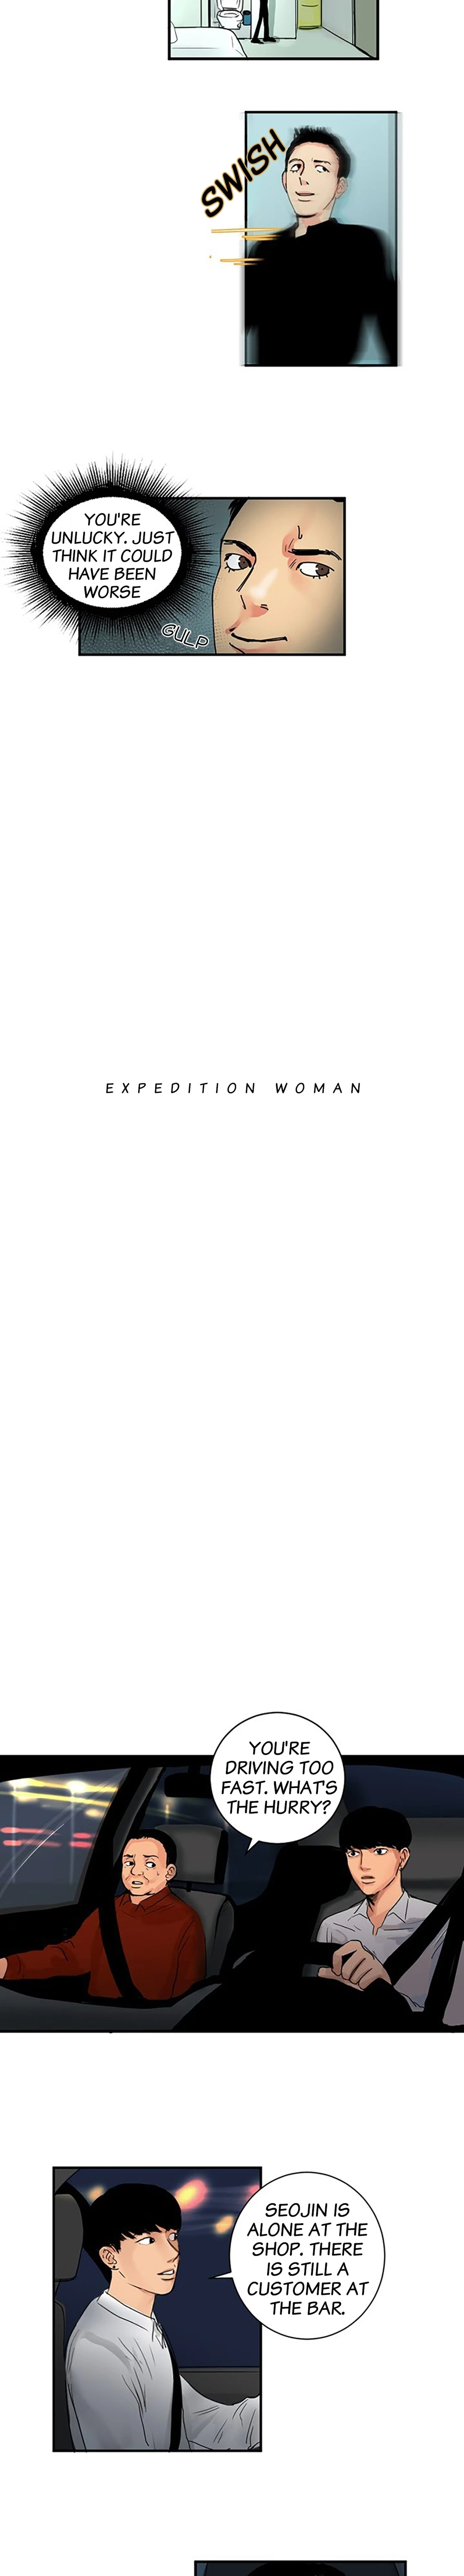 Expedition Woman image